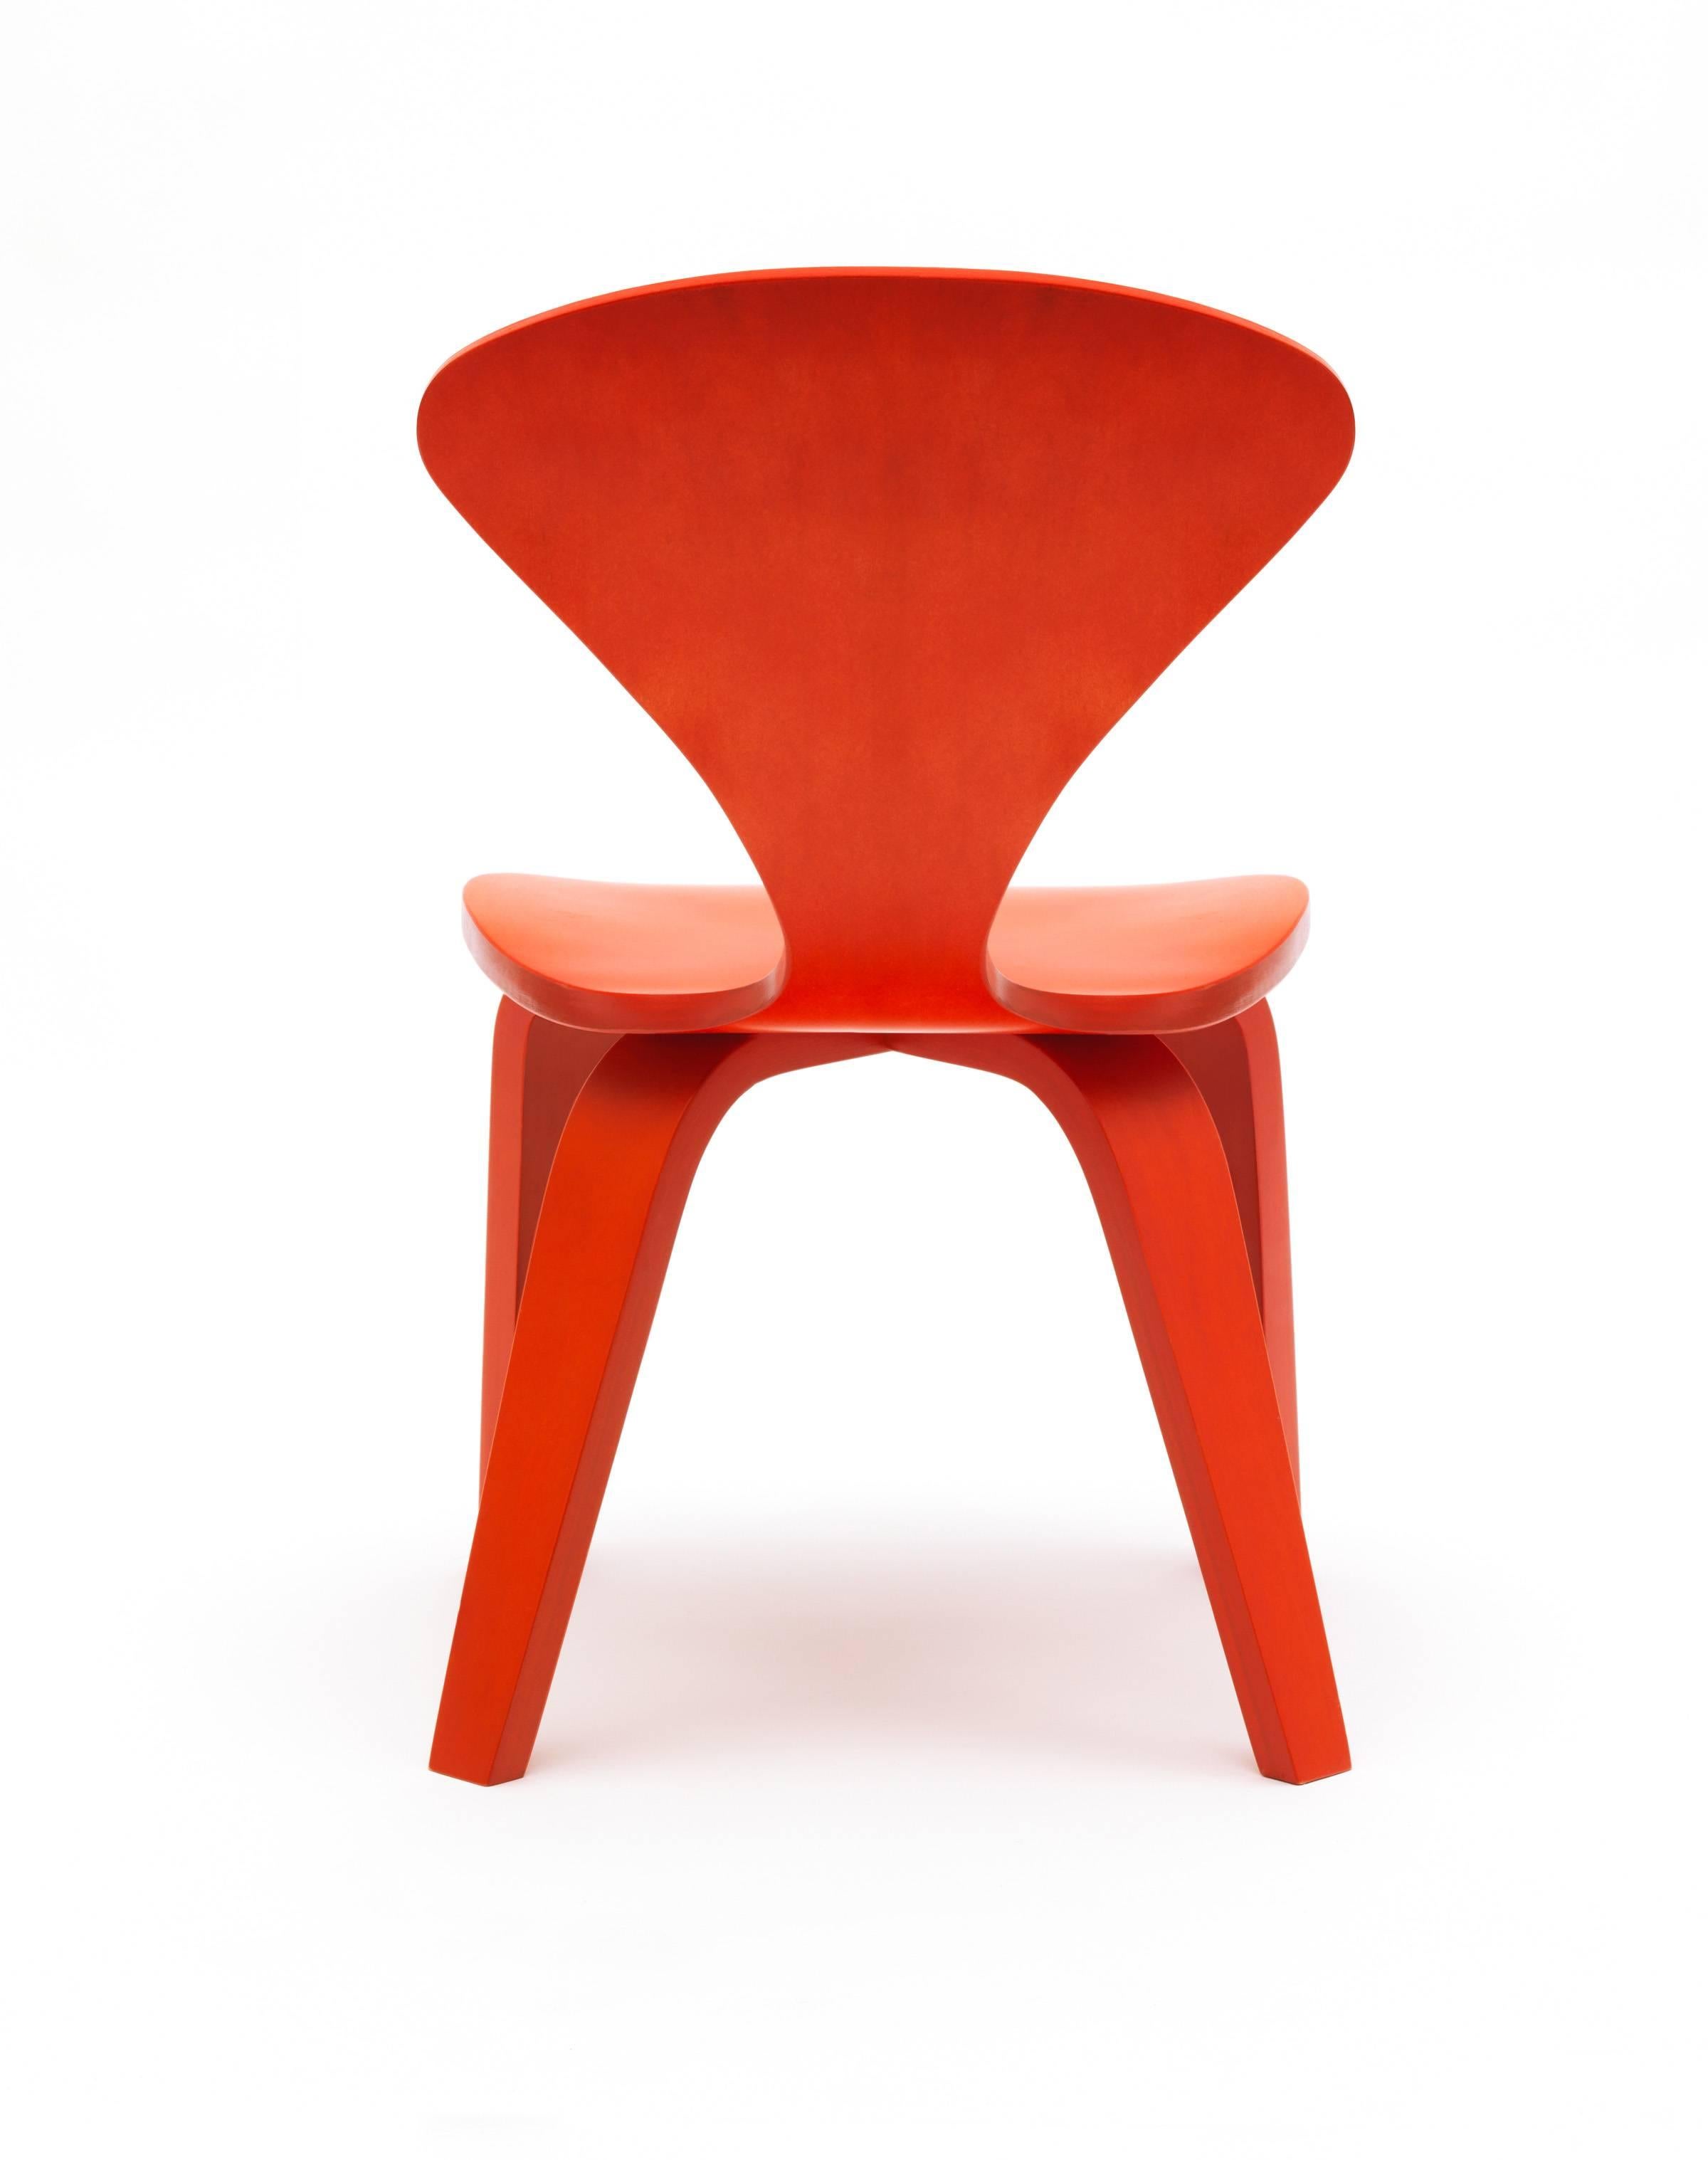 American Cherner Child Chair by Benjamin Cherner in Orange, Contemporary, USA, 2007 For Sale